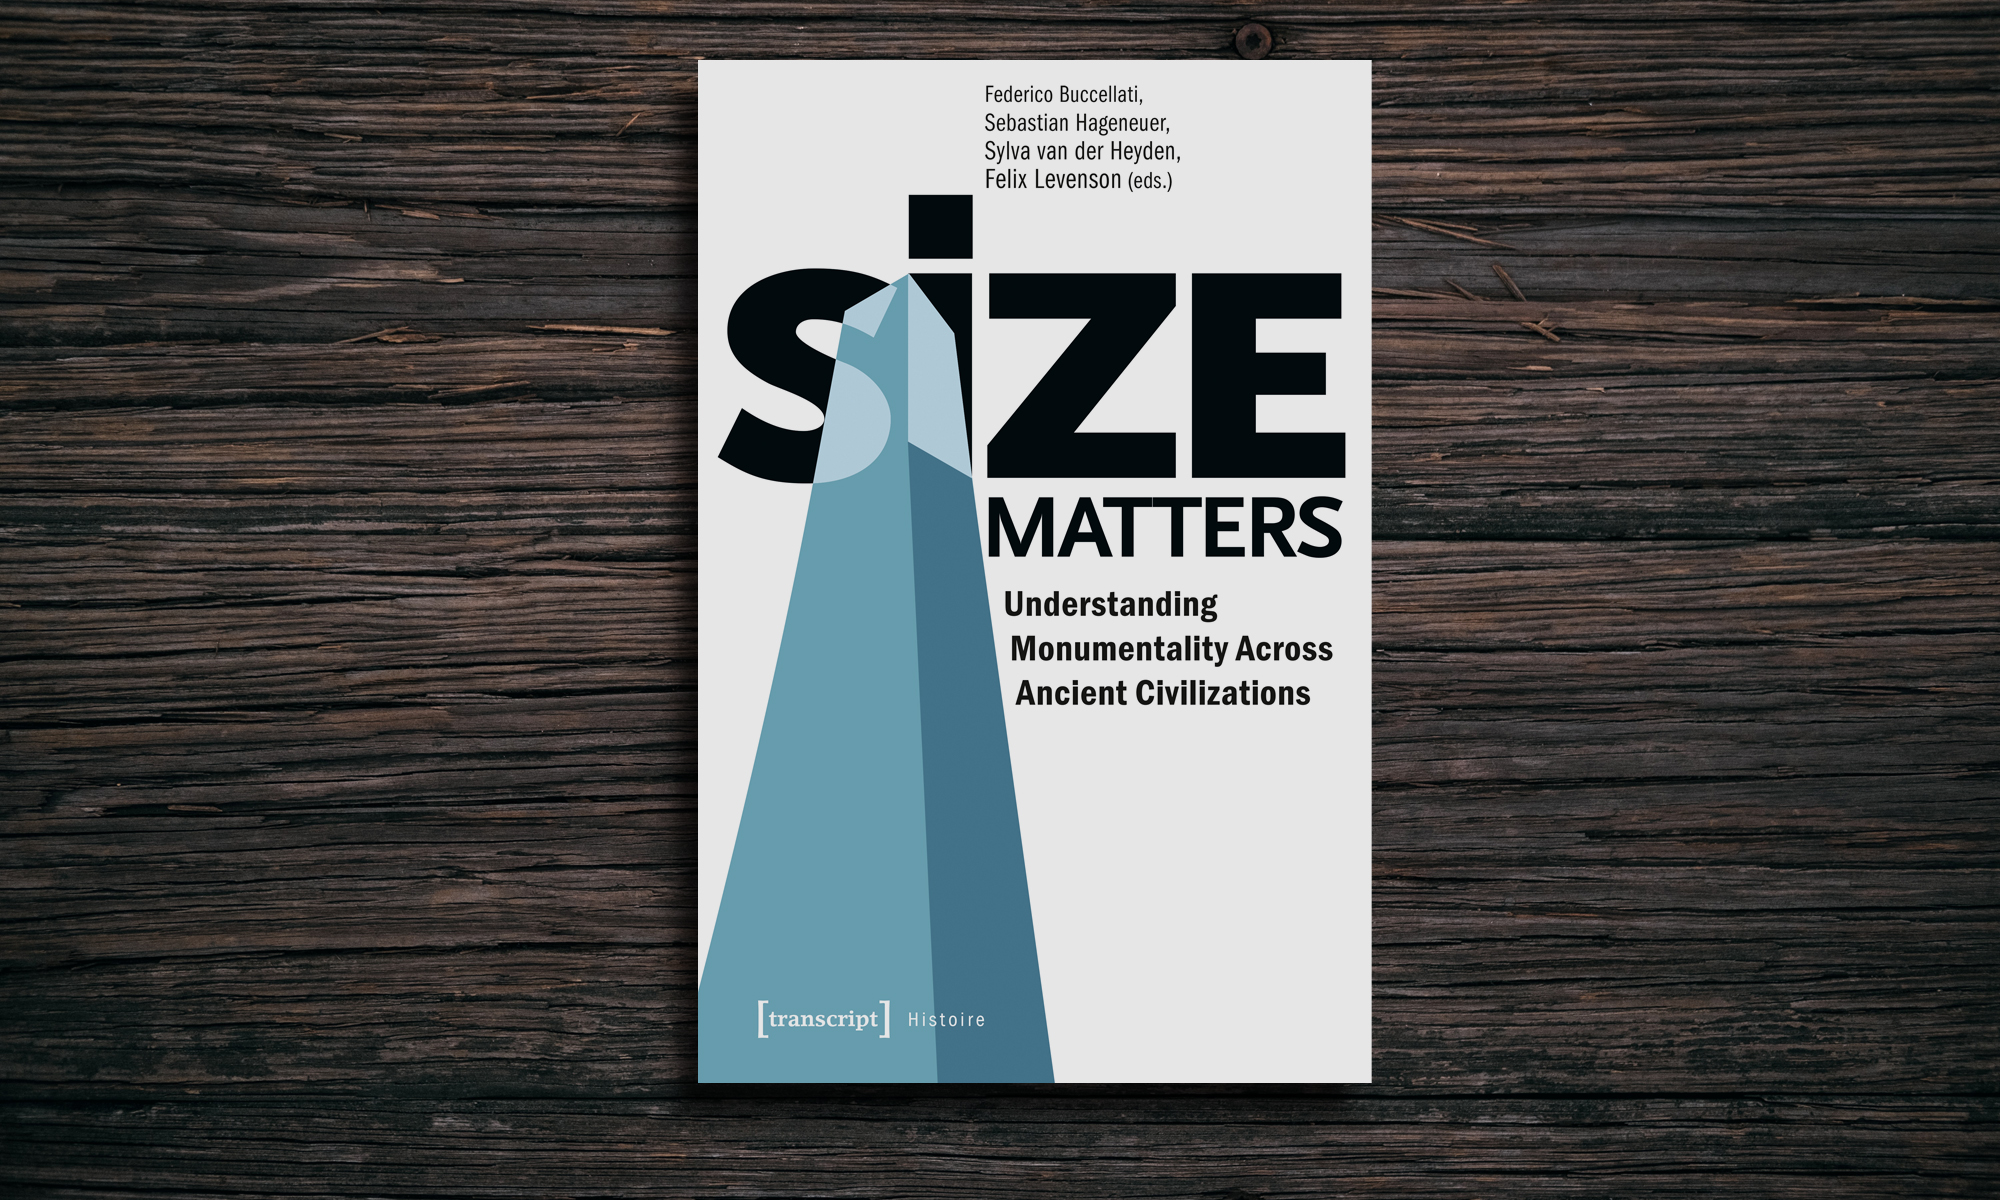 Image of the cover of the book "Size Matters"